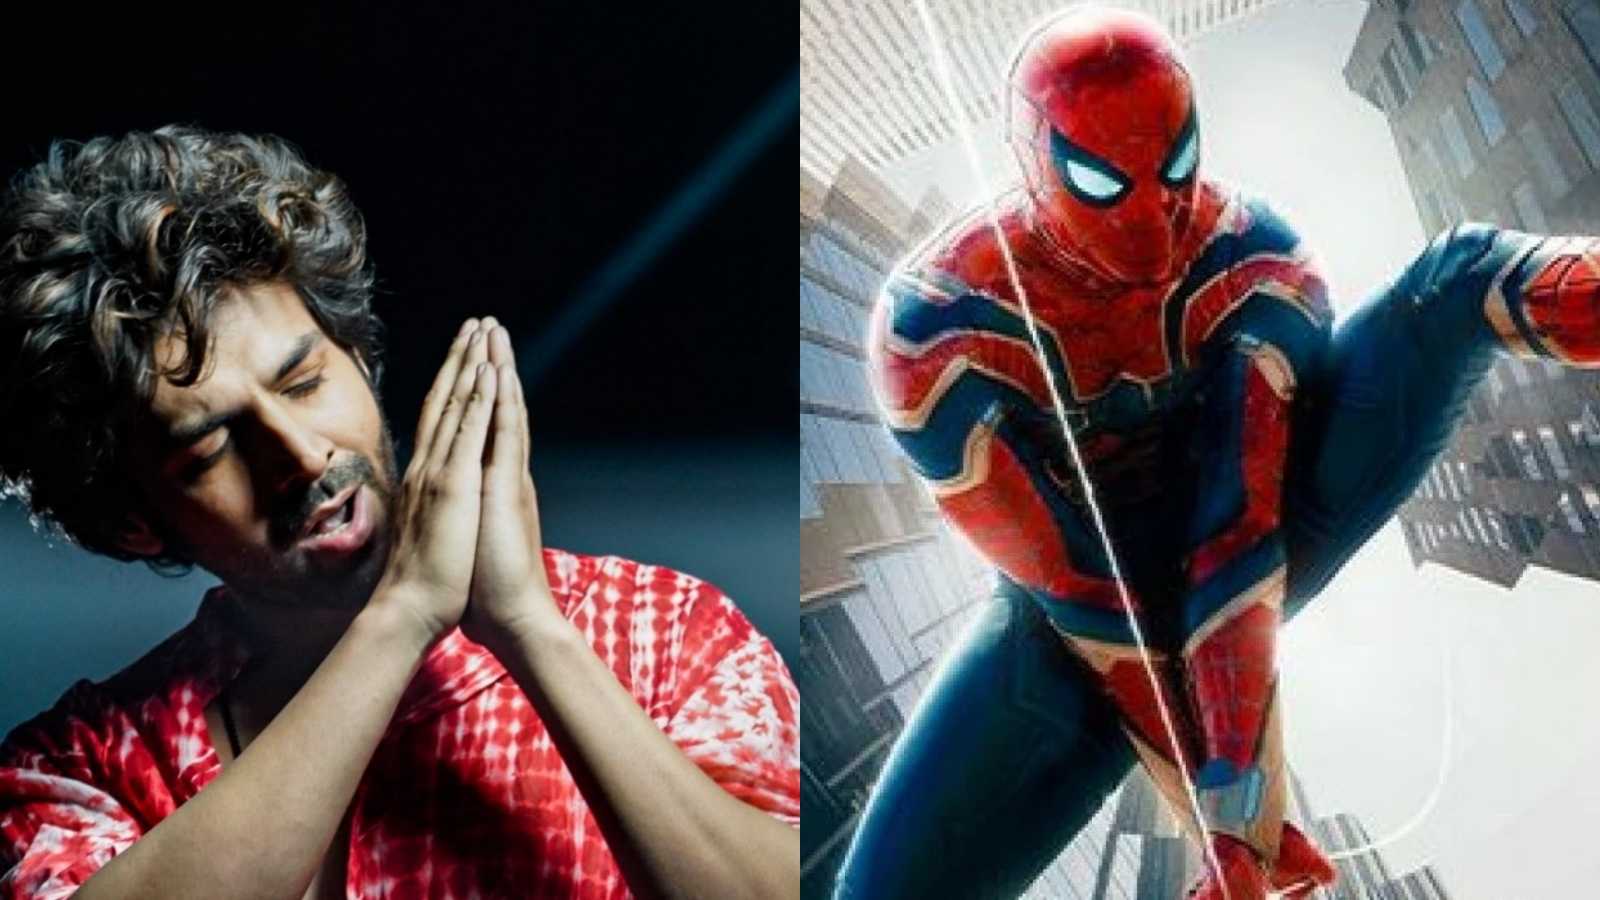 After Bhool Bhulaiyaa 2, Kartik Aaryan says he wishes to play Spider-Man ditching the option to be Thor or Captain America